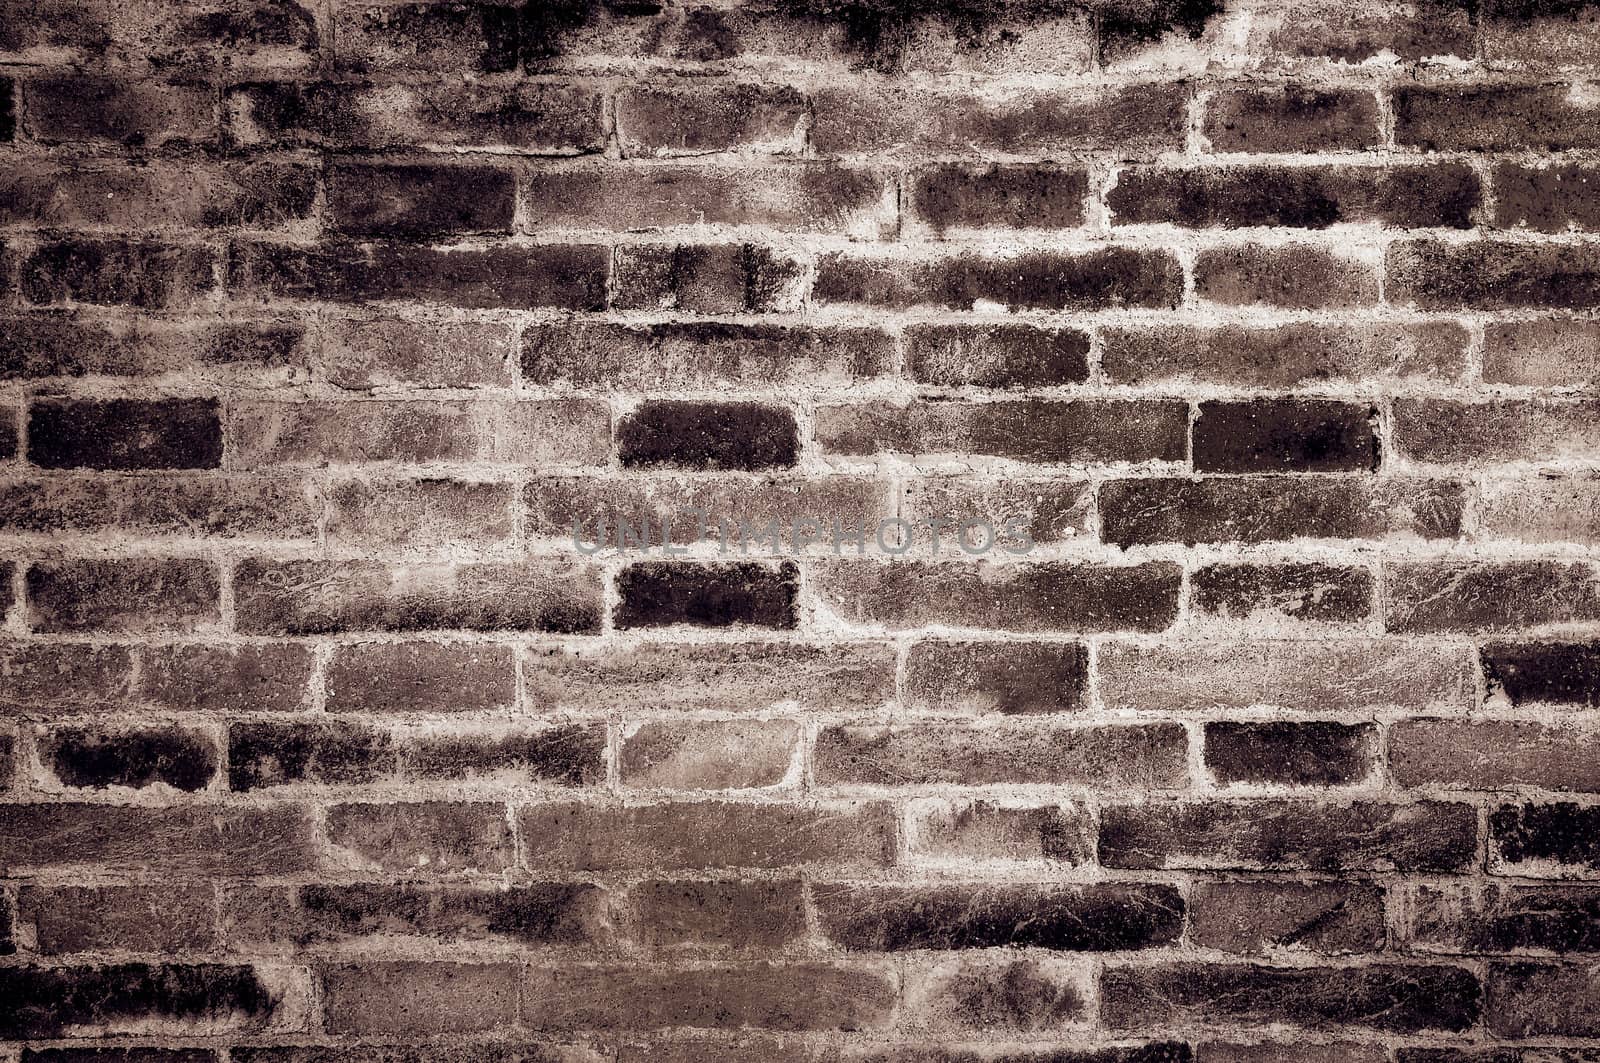 Vintage old textured brick wall by martinm303